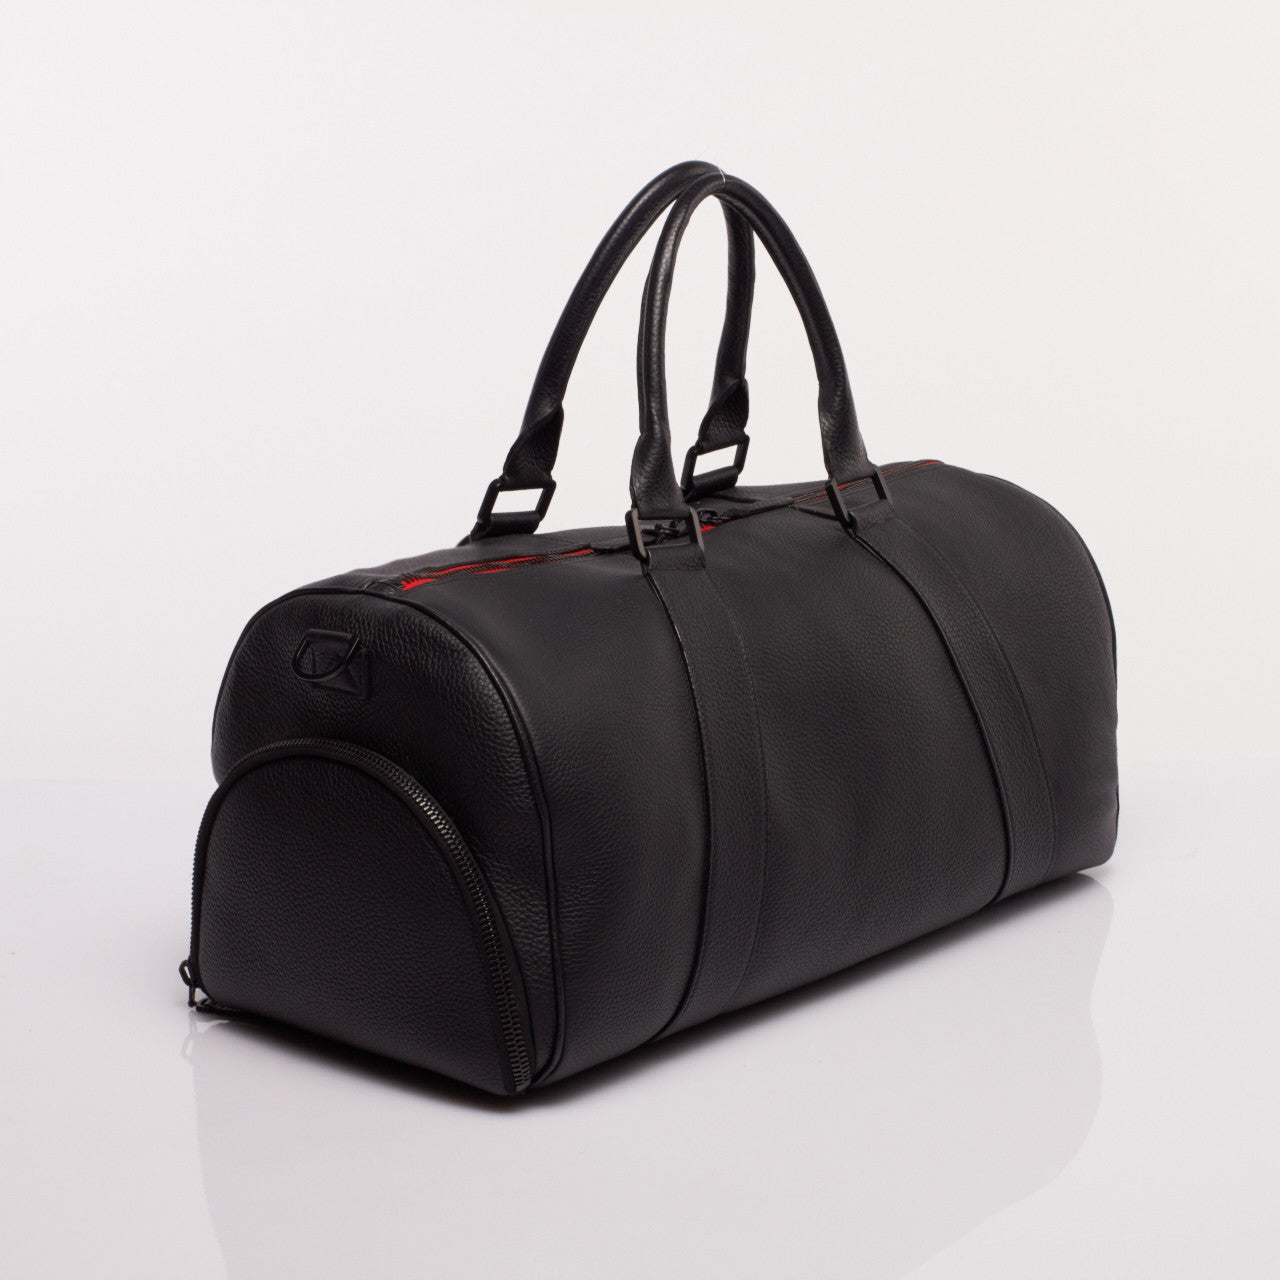 Saint Augustin Luxury Bag in Black Taurillon Leather by Anonyme